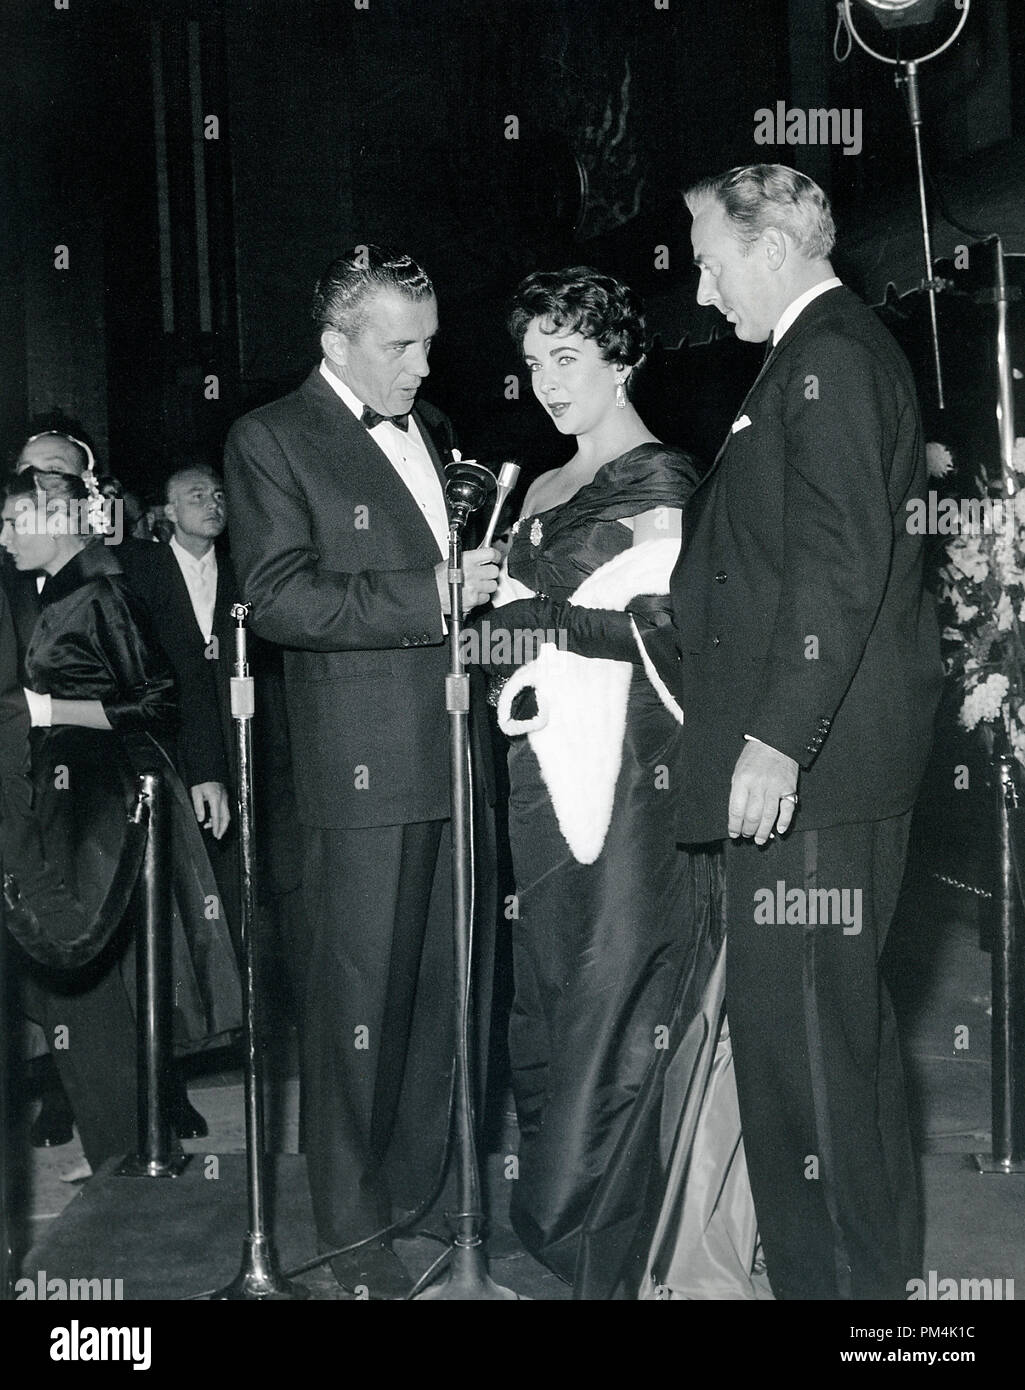 Elizabeth Taylor and Michael Wilding being interviewed by Ed Sullivan at a formal event, circa 1952. File Reference #1014 013 THA © JRC /The Hollywood Archive - All Rights Reserved. Stock Photo